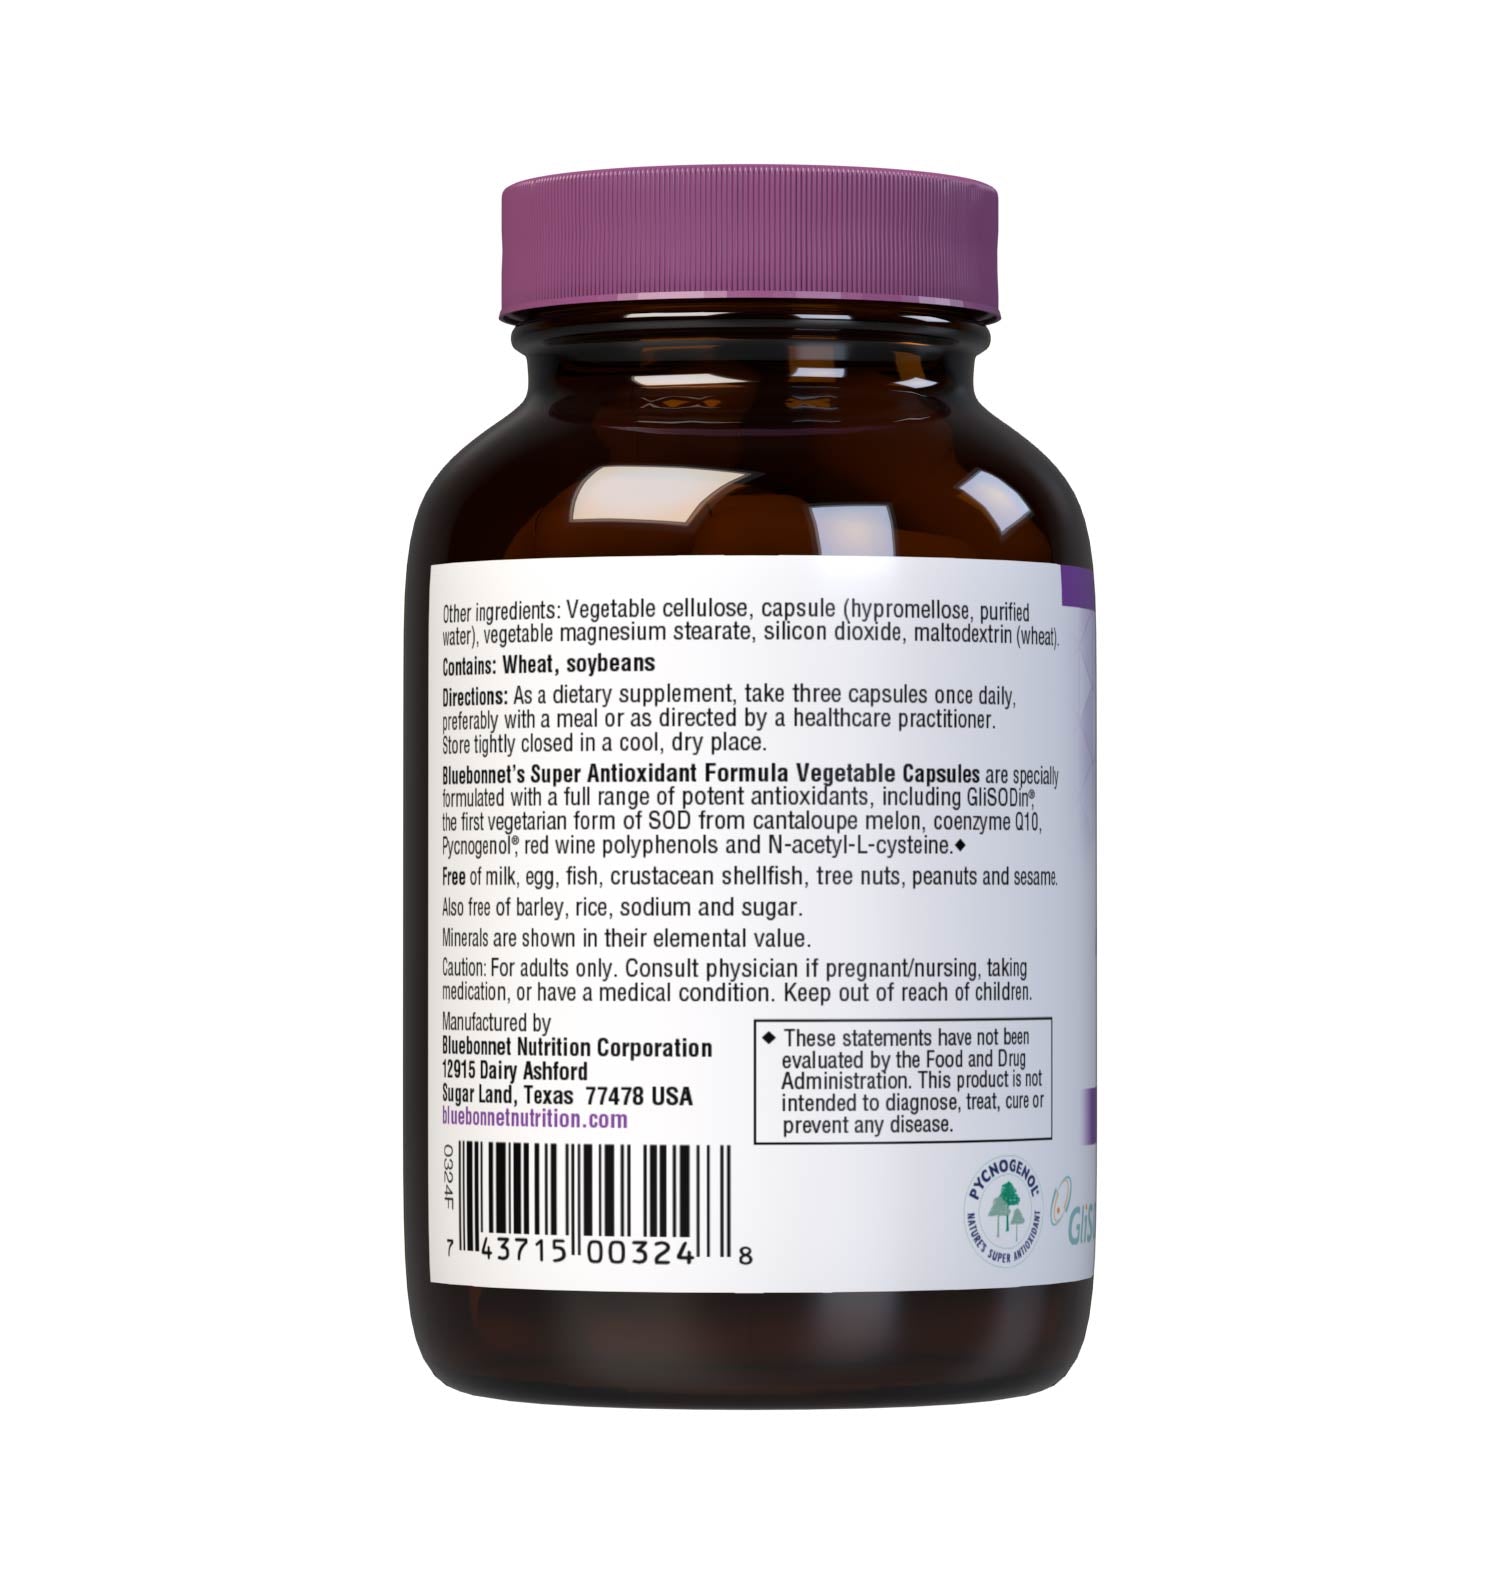 Bluebonnet’s Super Antioxidant Formula 30 Vegetable Capsules are specially formulated with a full range of potent antioxidants, including GliSODin, the first vegetarian form of SOD from cantaloupe melon, and coenzyme Q10, Pycnogenol, red wine polyphenols and N-acetyl-L-cysteine. Description panel. #size_30 count